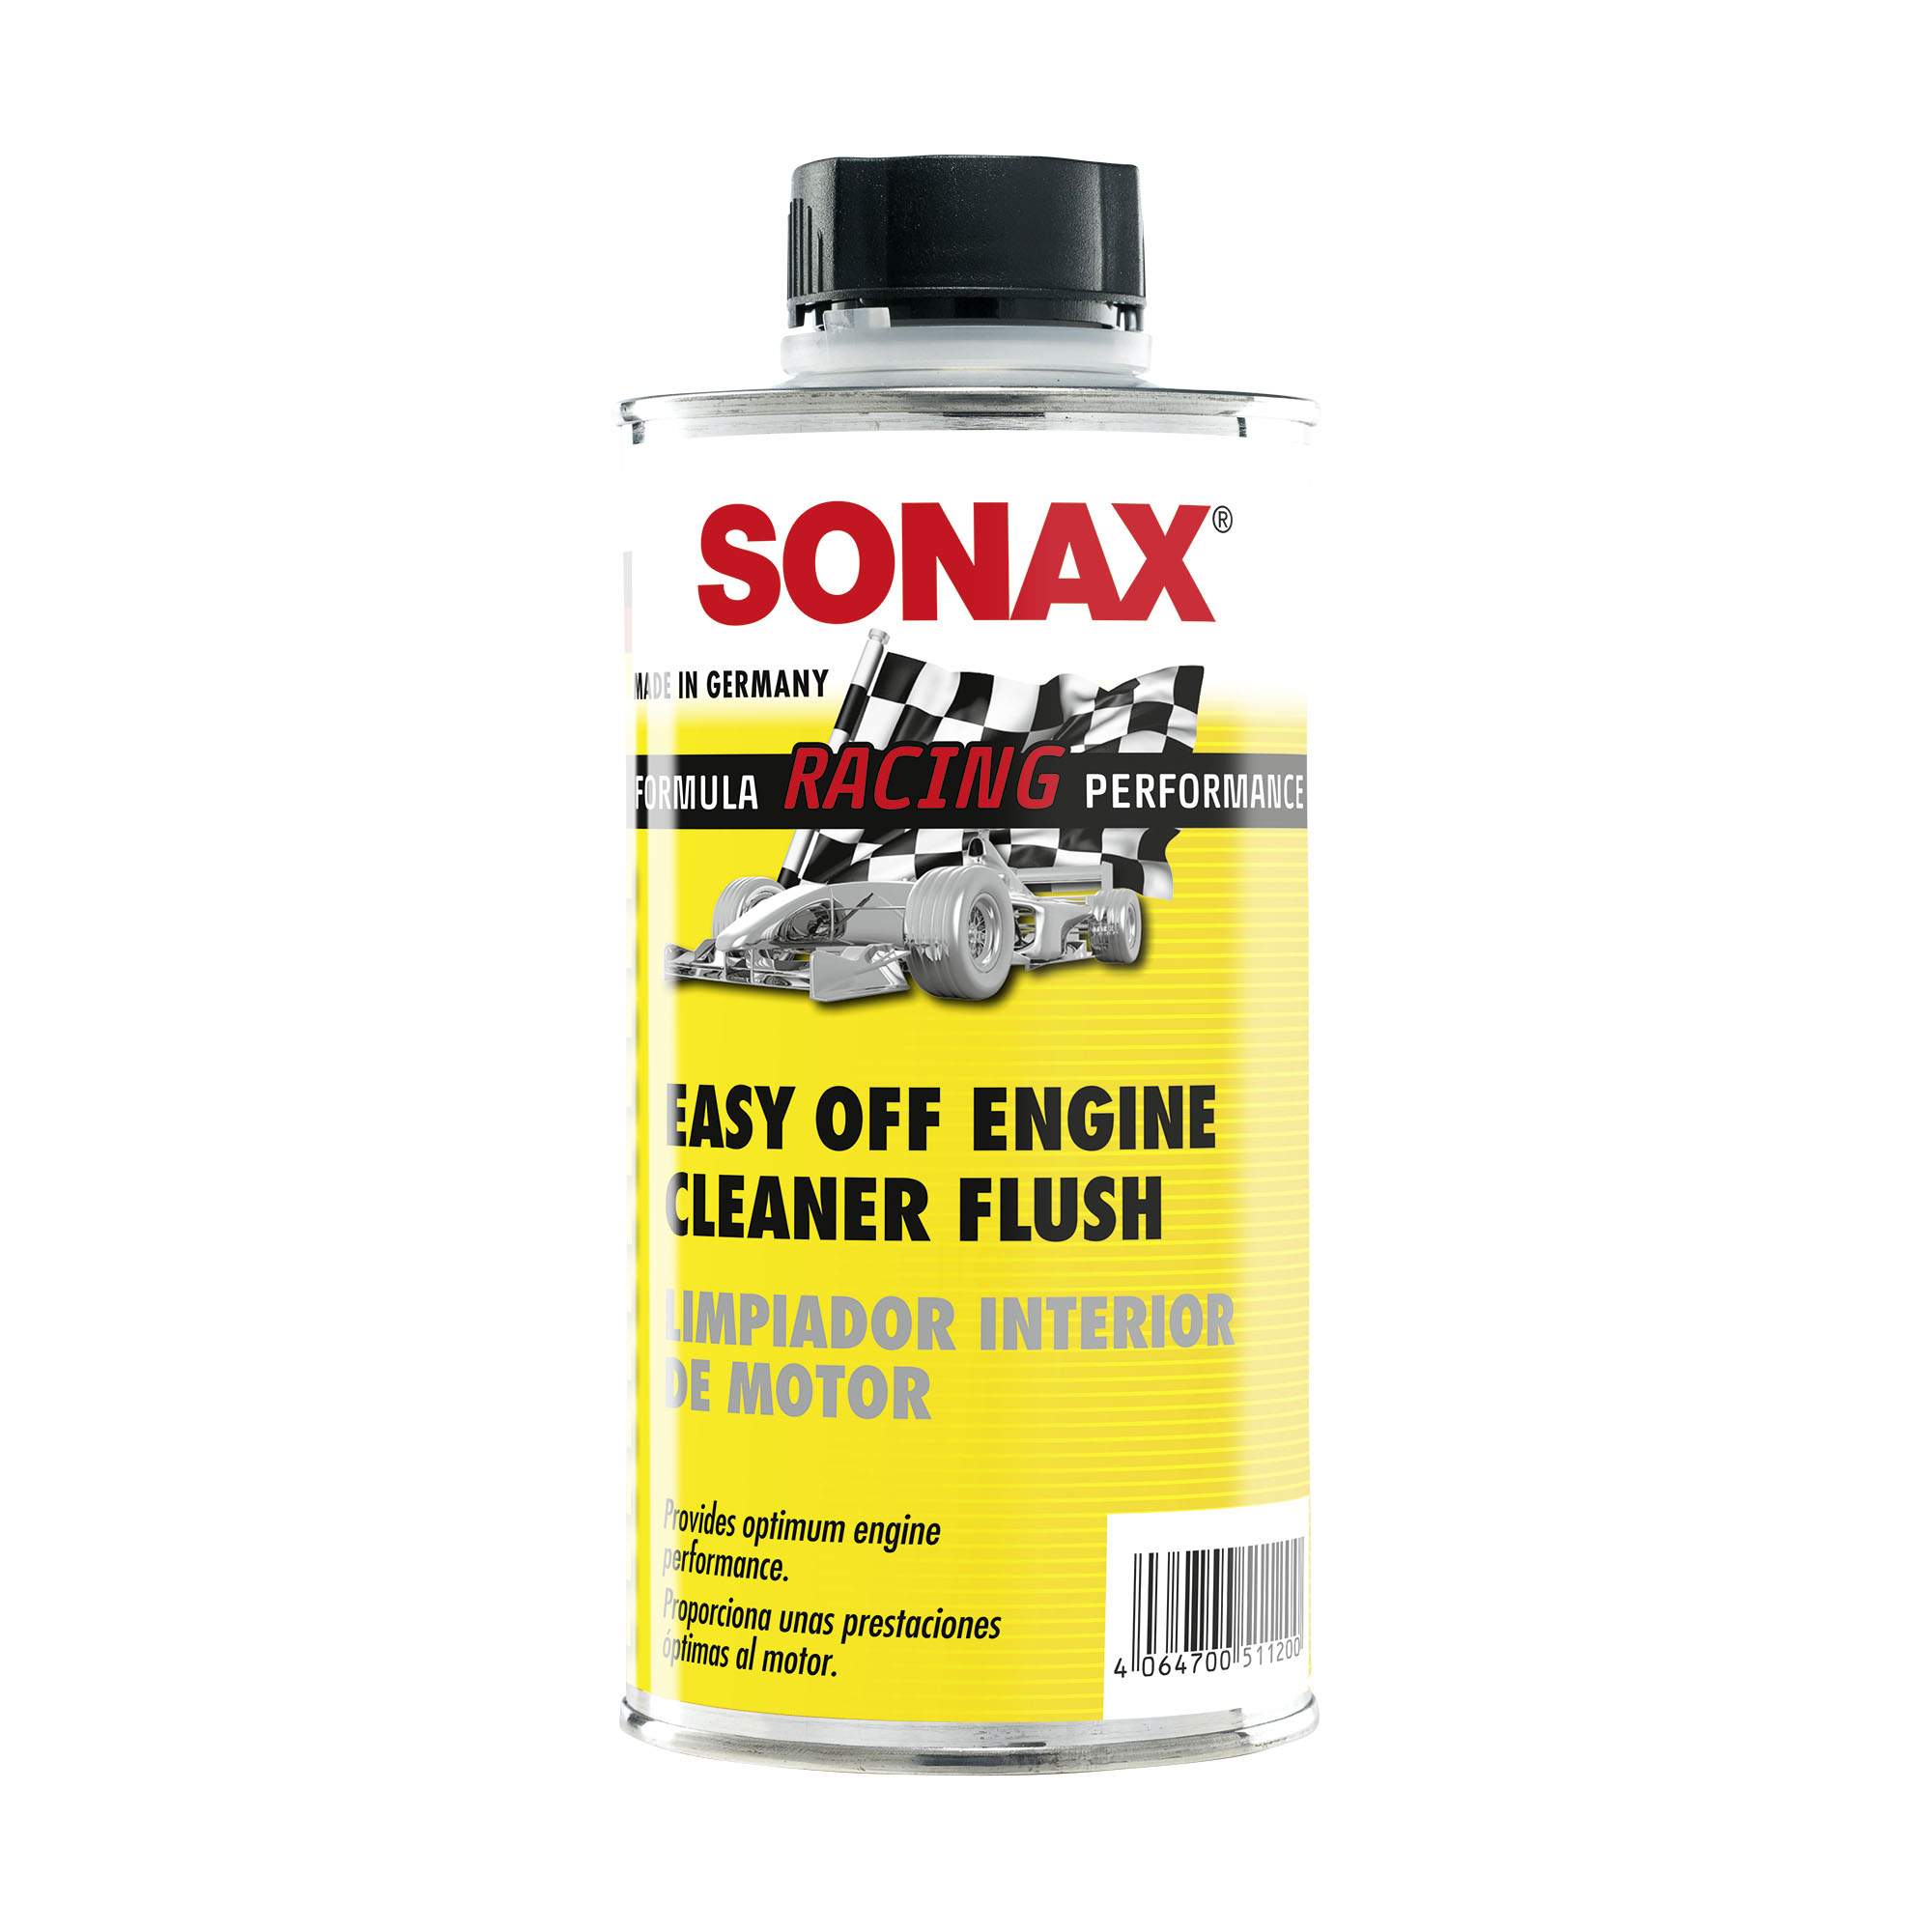 Sonax Internal Engine Cleaning